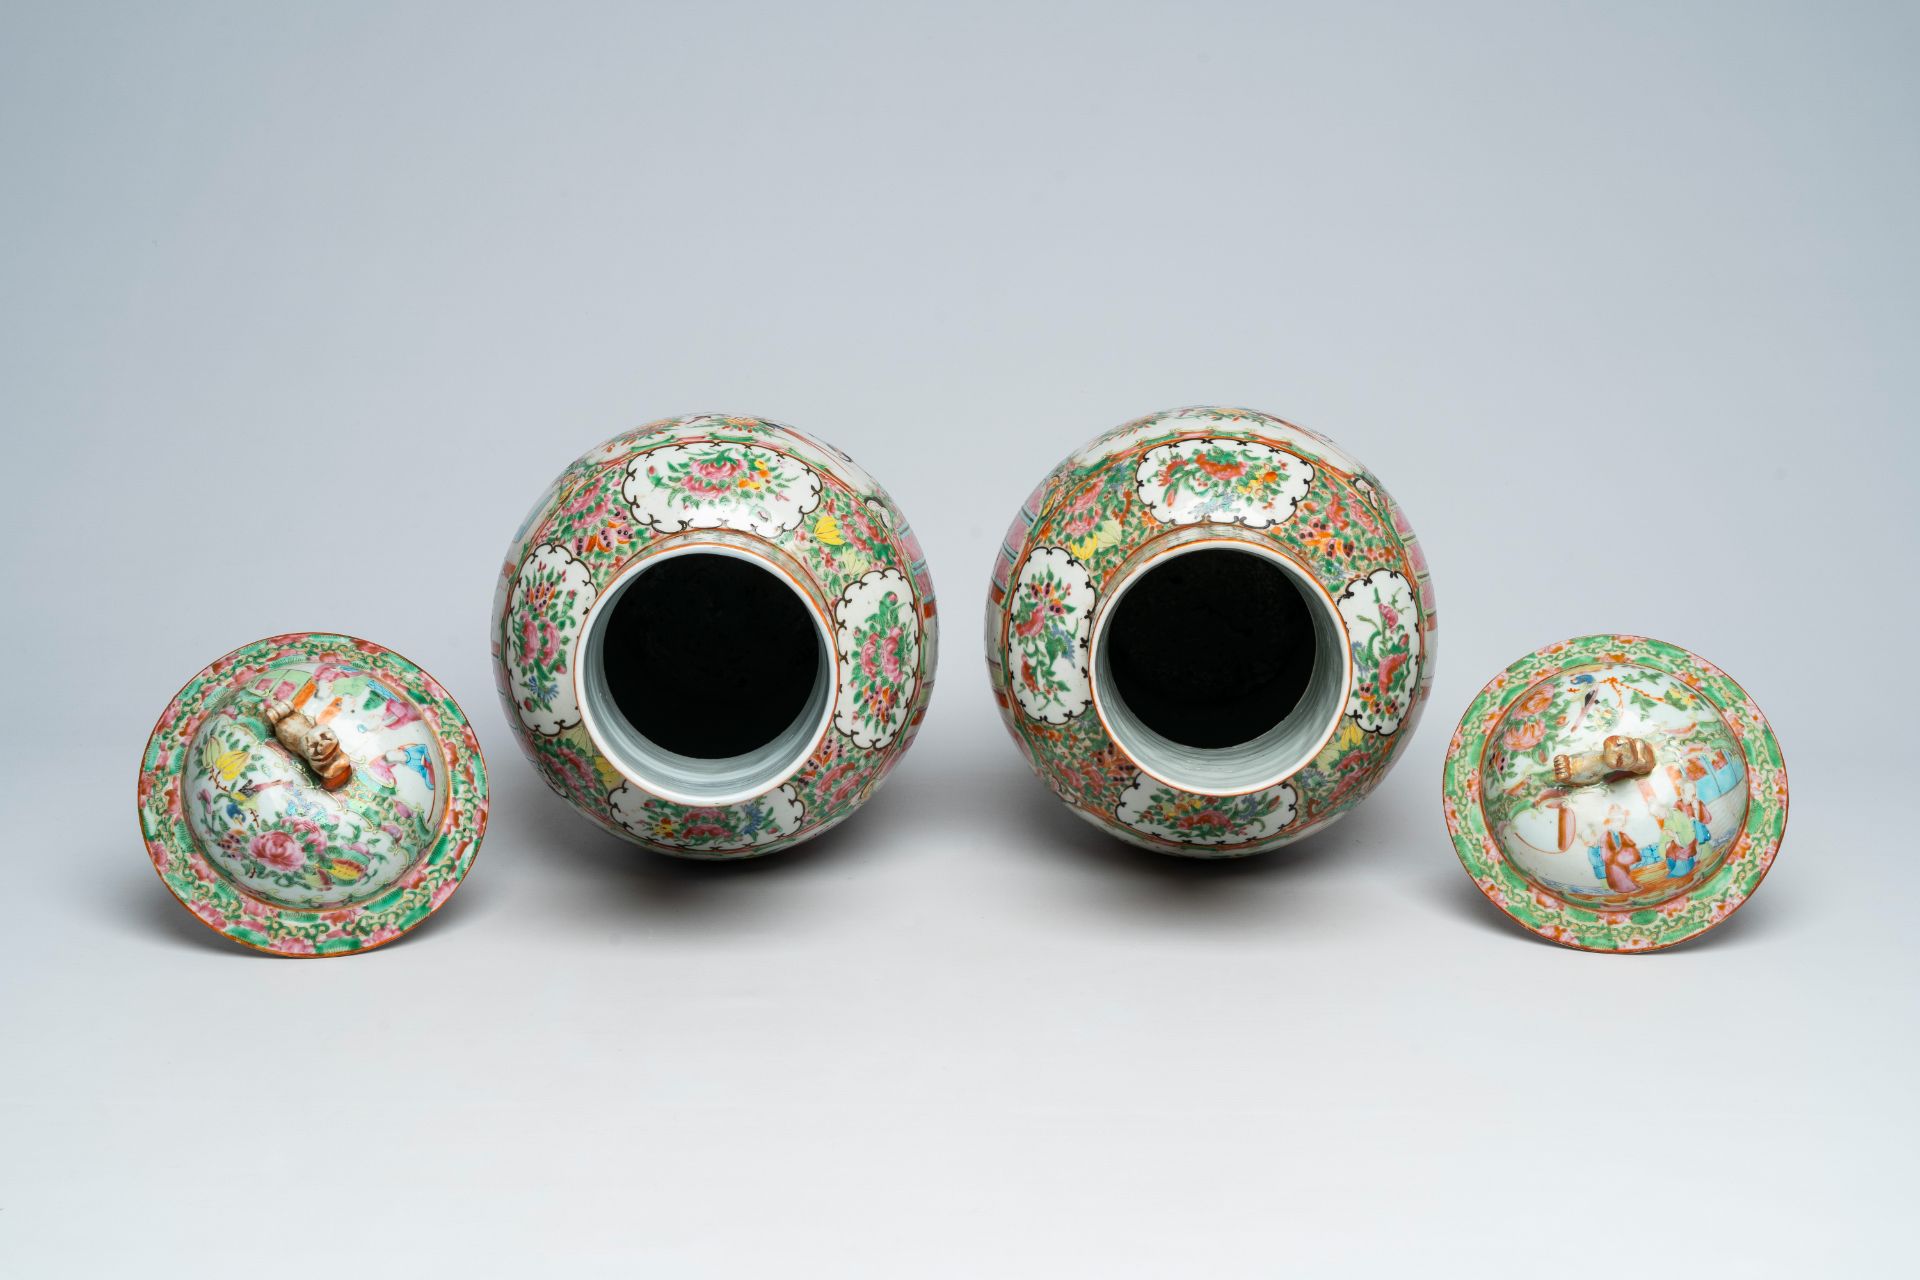 A pair of Chinese Canton famille rose vases and covers with palace scenes and floral design, 19th C. - Image 5 of 6